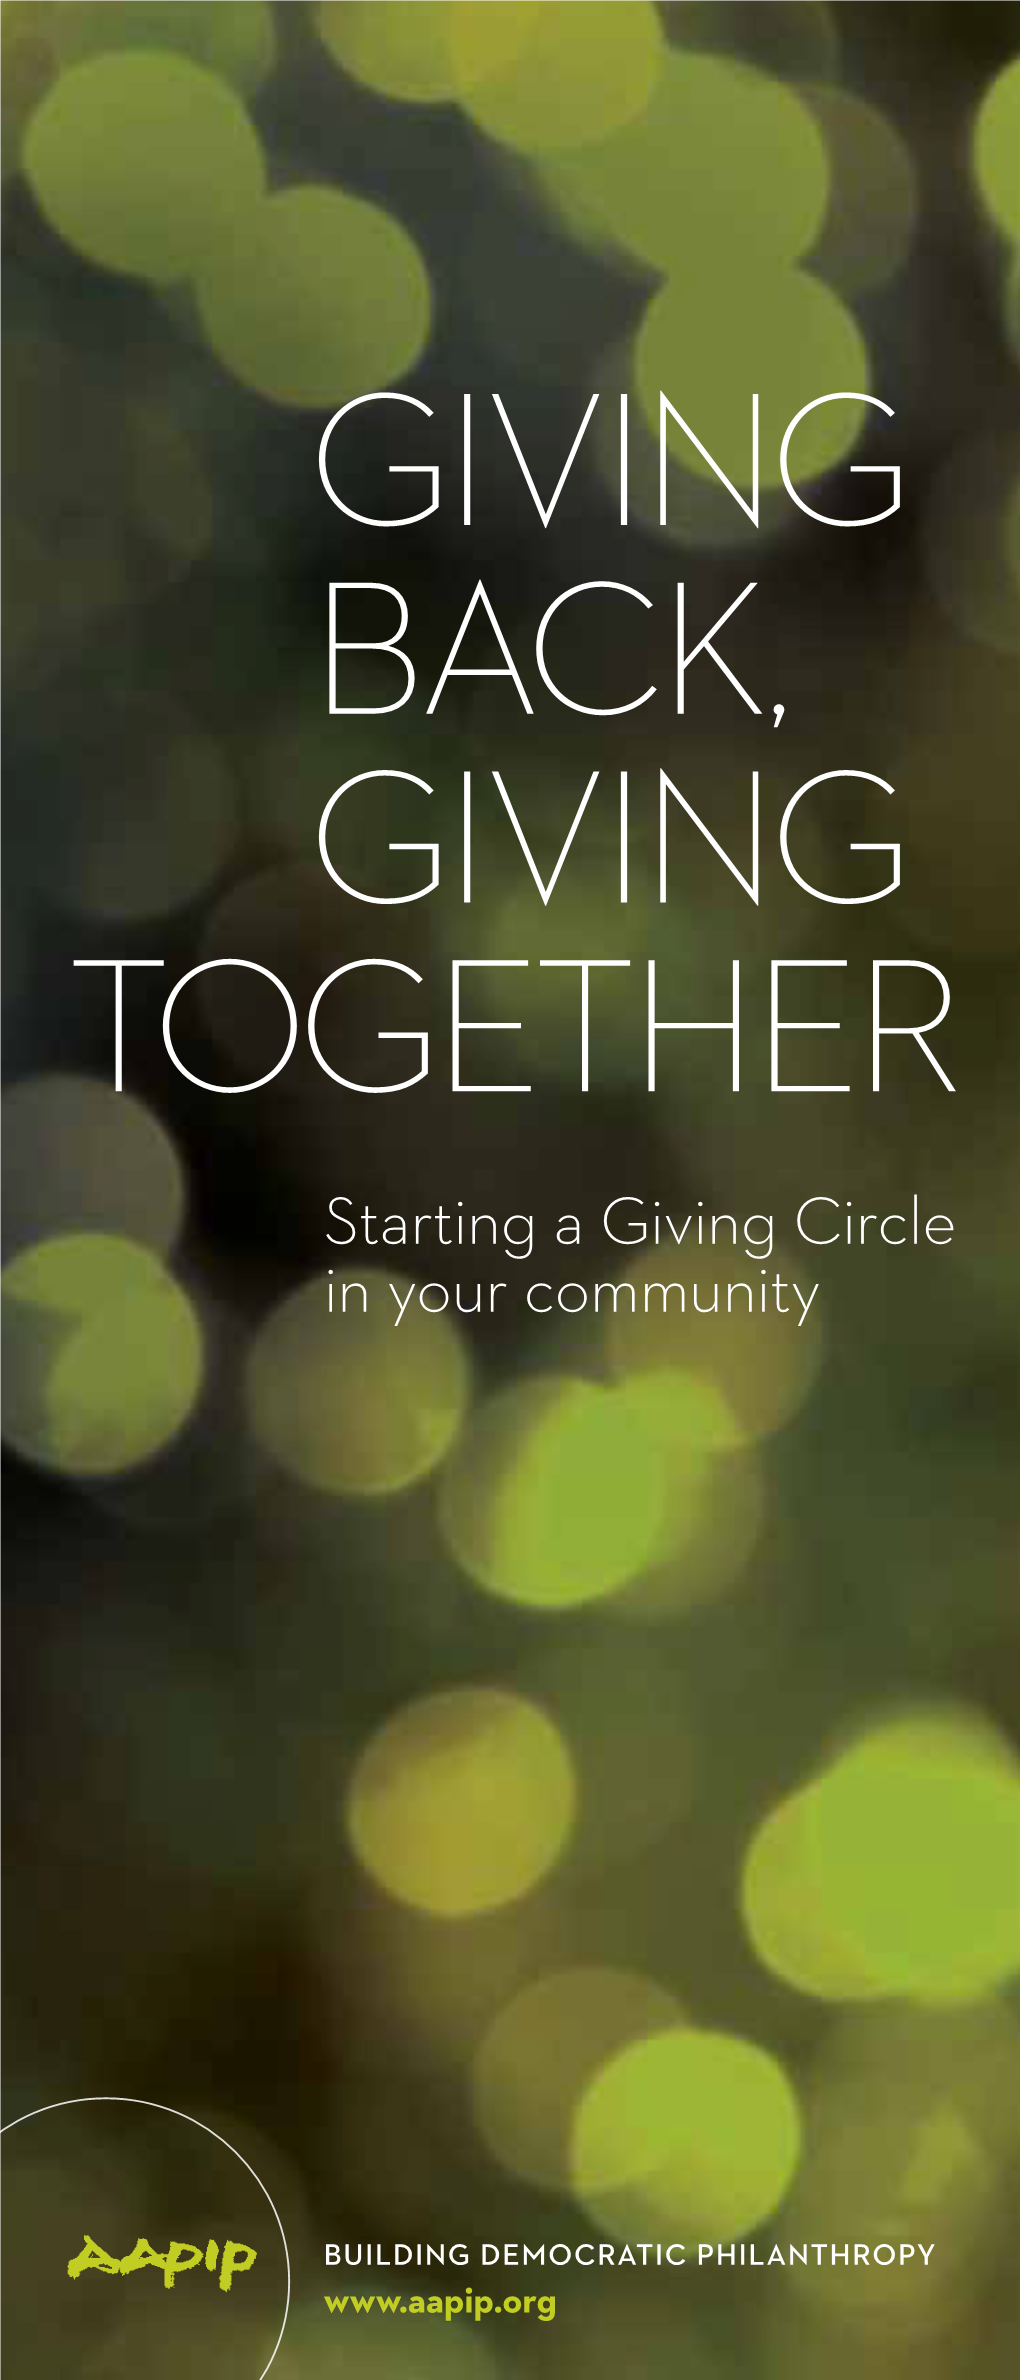 Giving Back, Giving Together Starting a Giving Circle in Your Community